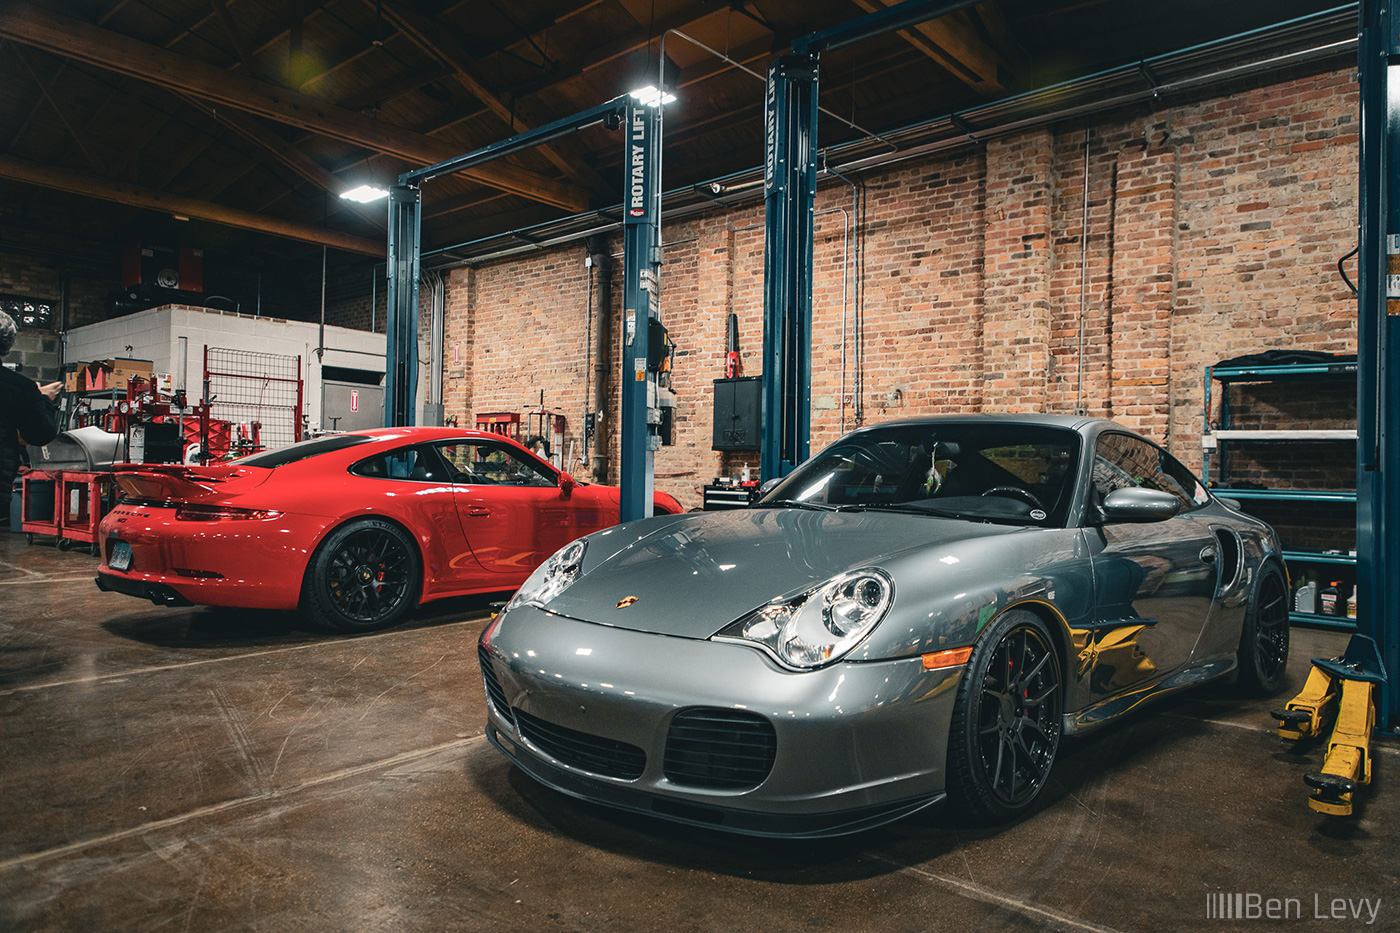 Porsche 911 GTS and 911 Turbo at MPCars in Chicago